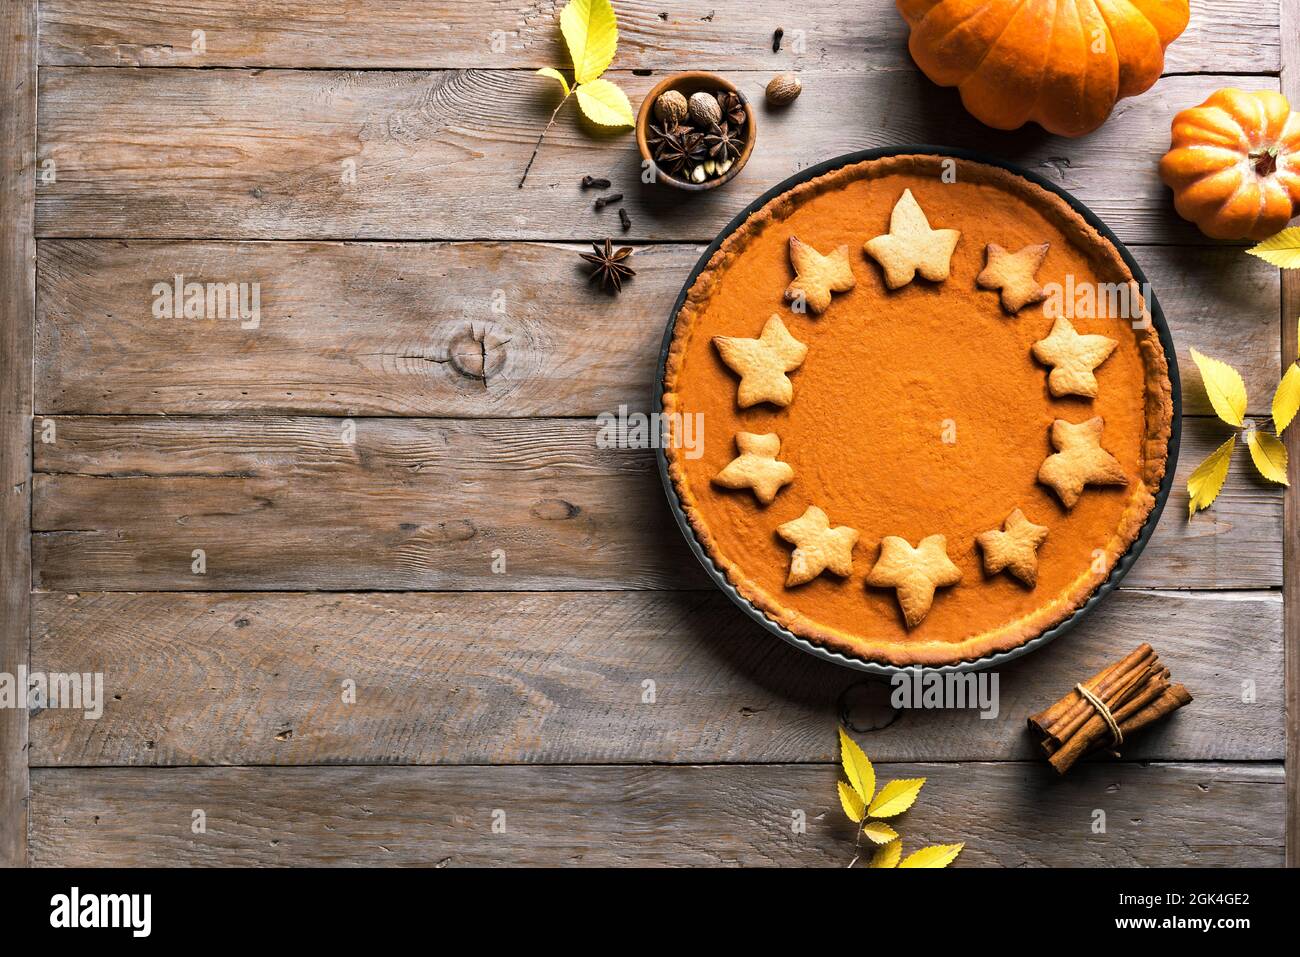 Pumpkin Pie on wooden background, top view, copy space. Homemade pastry for Thanksgiving holiday - traditional autumn  Pumpkin Pie or tart. Stock Photo